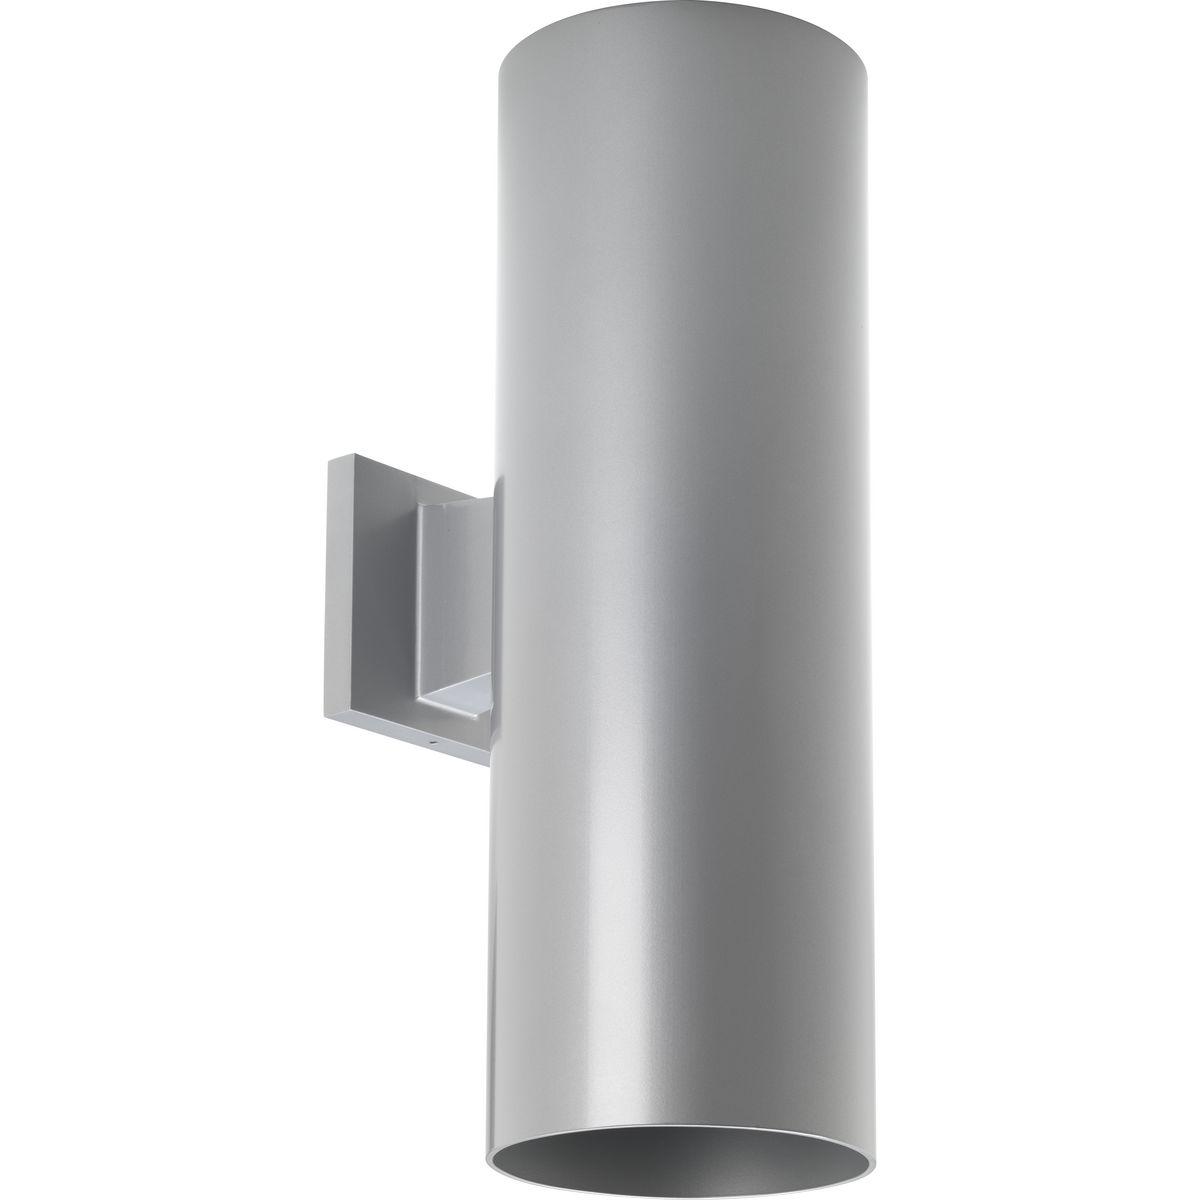 Hubbell P5642-82 6" uplight/downlight wall cylinders are ideal for a wide variety of interior and exterior applications including residential and commercial. The aluminum Cylinders offers a contemporary design with its sleek cylindrical form and elegant Metallic Gray fini